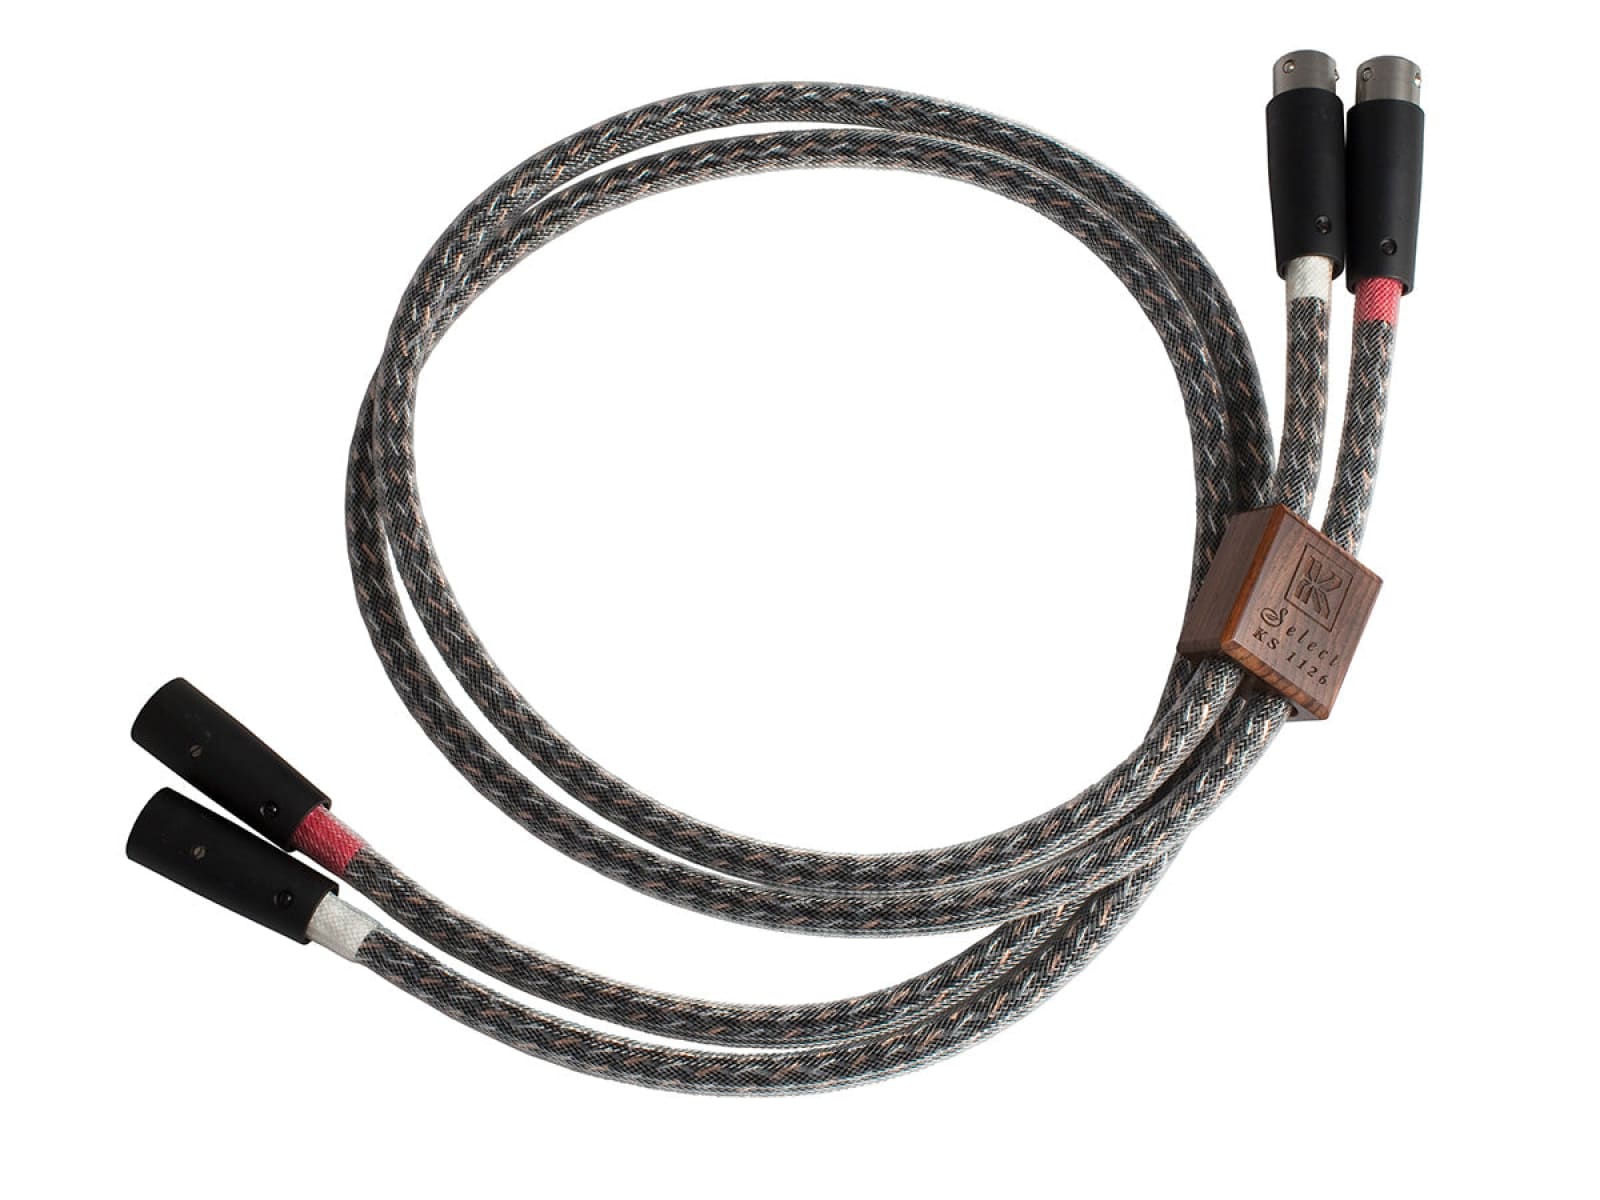 Kimber Kable - Select Series Ks1126 Silver/Copper Balanced Xlr Interconnects (Pair) New Cables